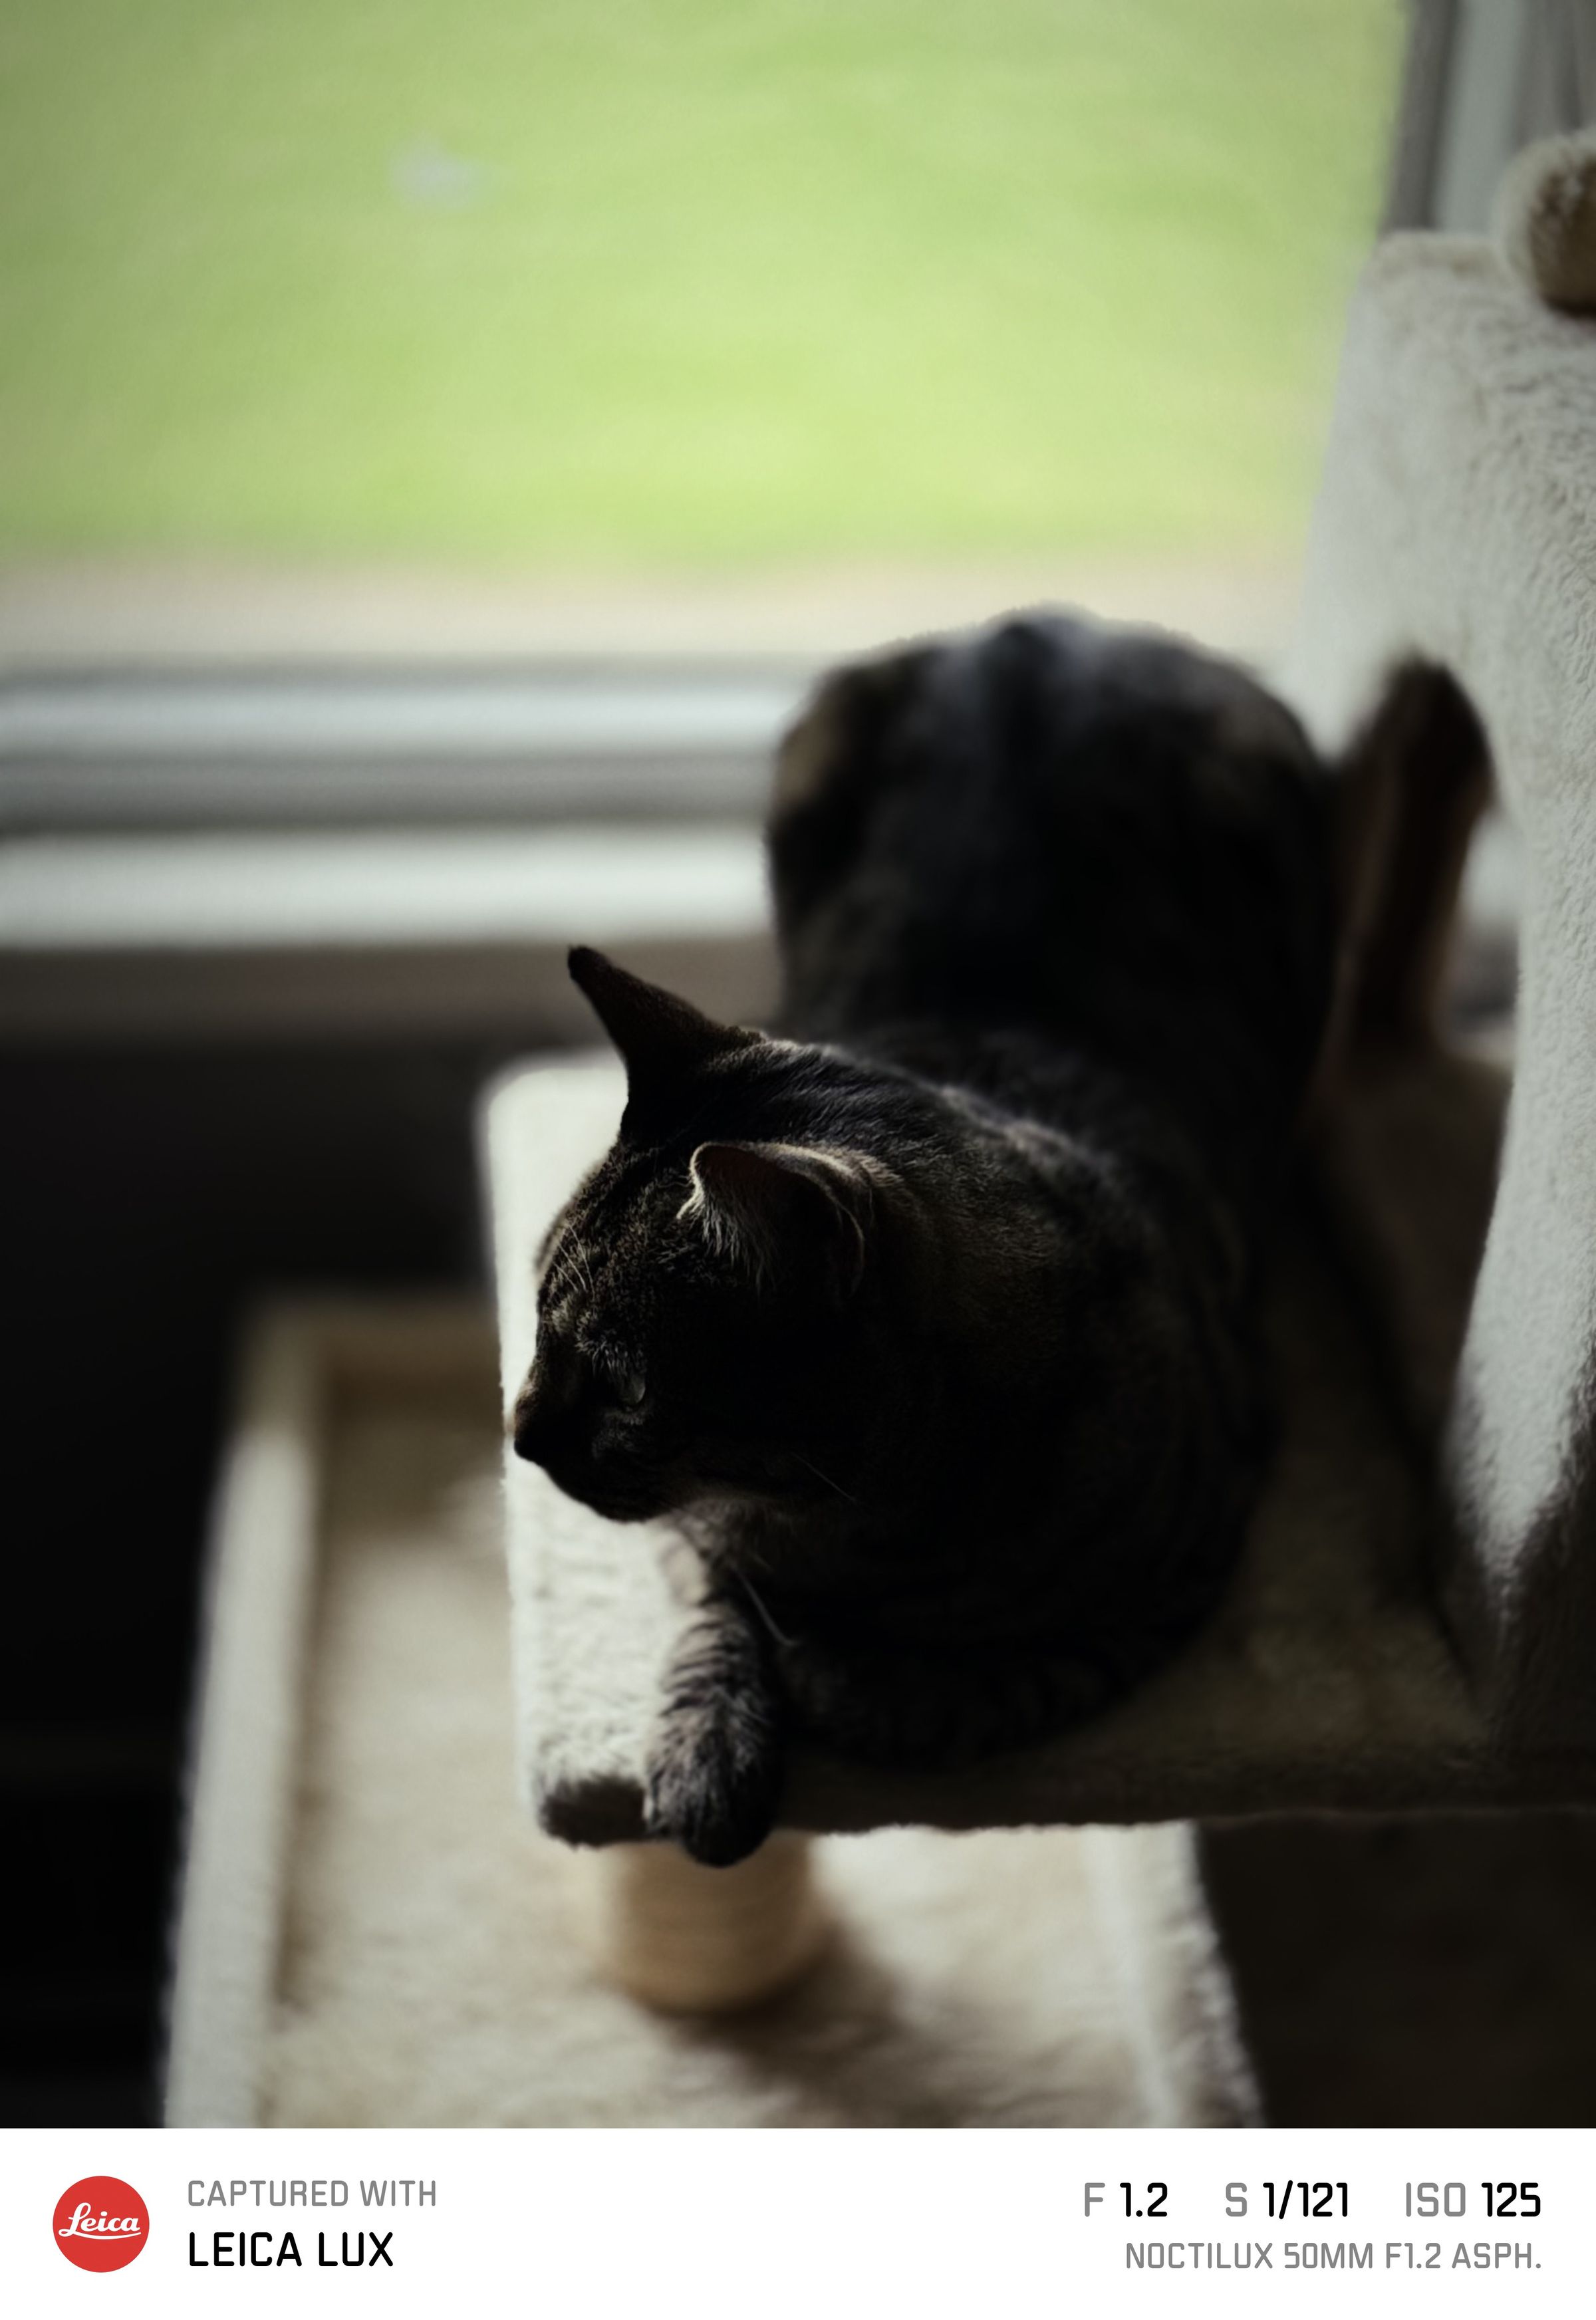 A cat near a window. The photo also has a branded Leica Lux frame showing its metadata.